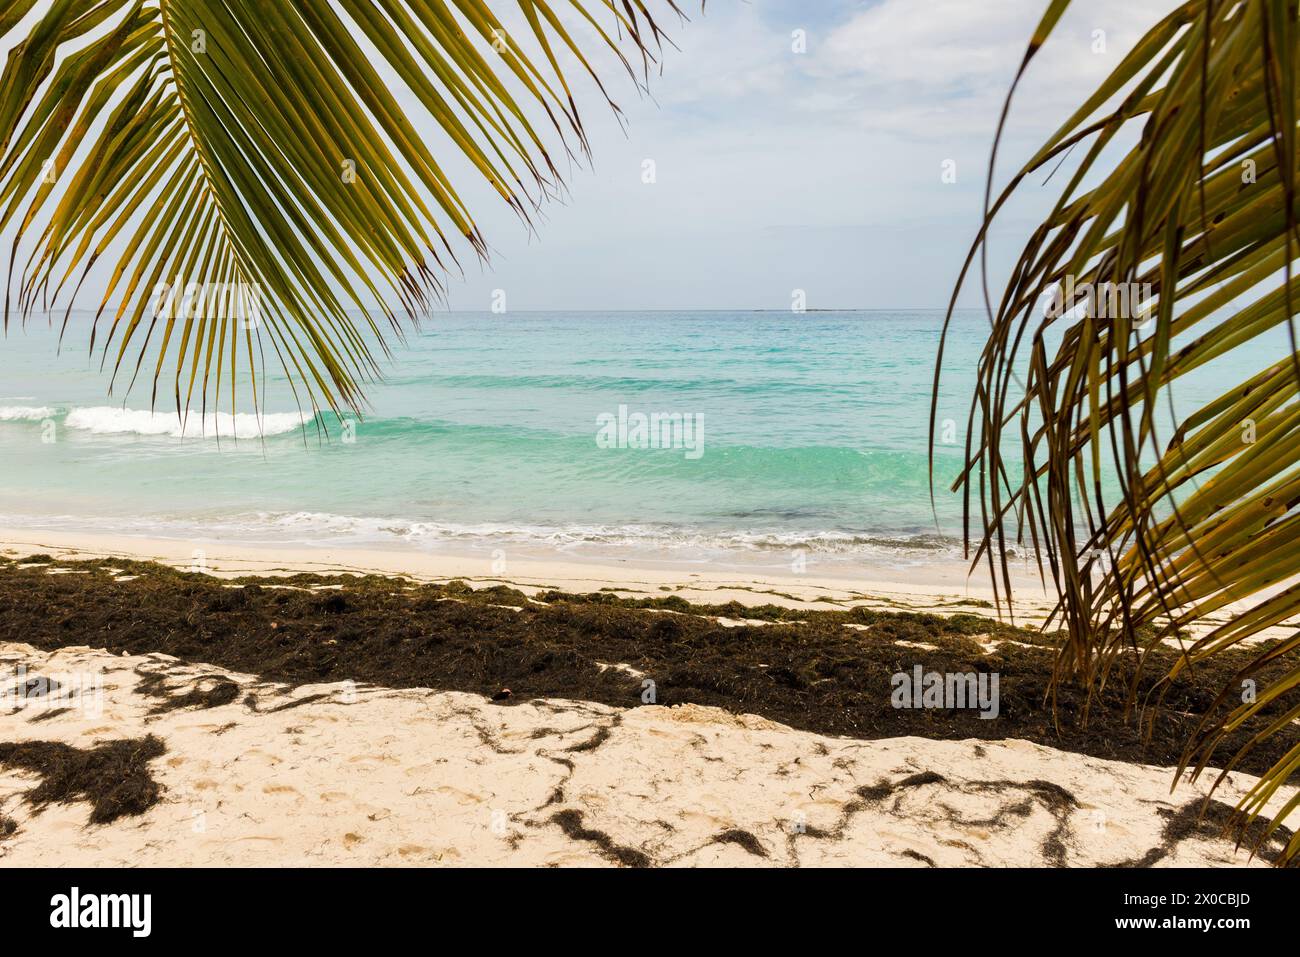 A beach with a palm tree in the foreground and a body of water in the background. The palm tree is partially visible, and the water is a beautiful sha Stock Photo